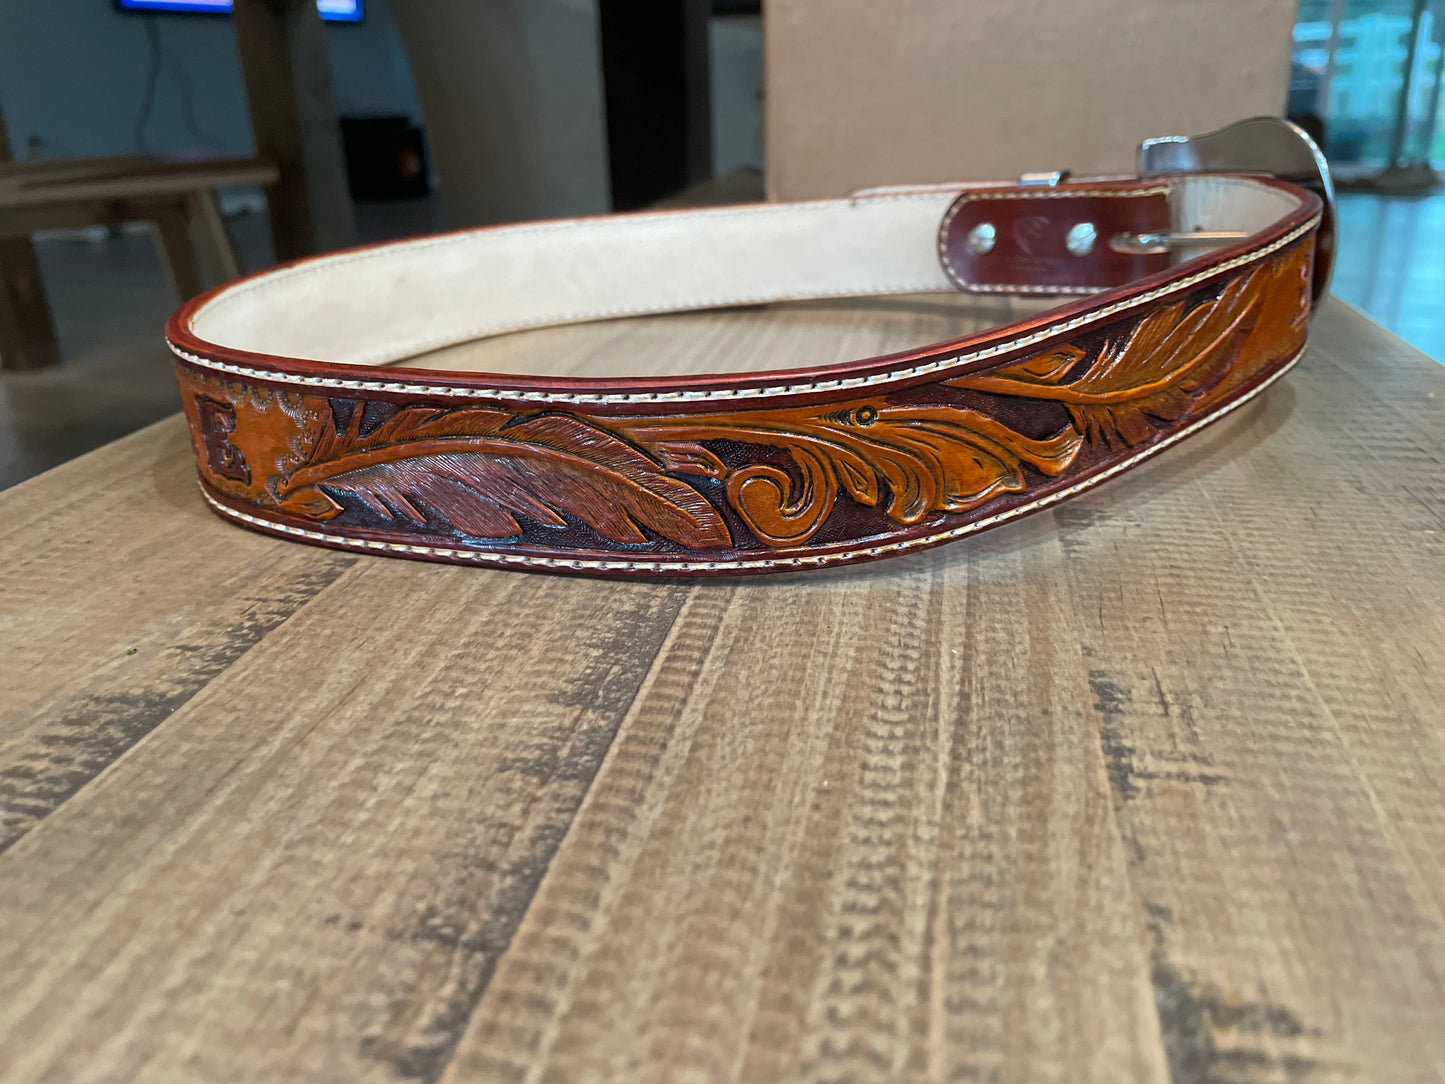 Western belt - hand carved feathers